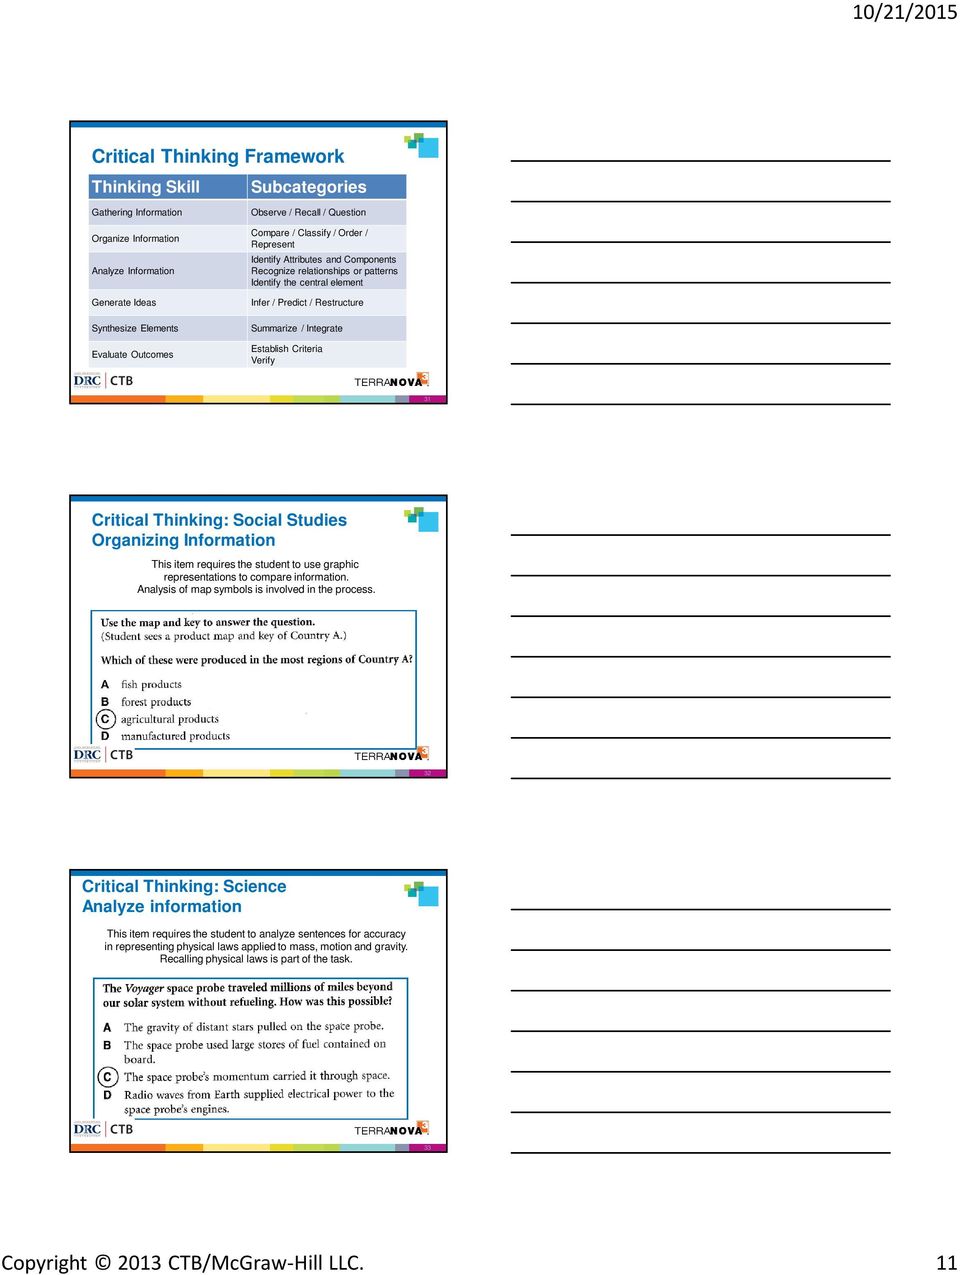 Establish Criteria Verify 31 Critical Thinking: Social Studies Organizing Information This item requires the student to use graphic representations to compare information.